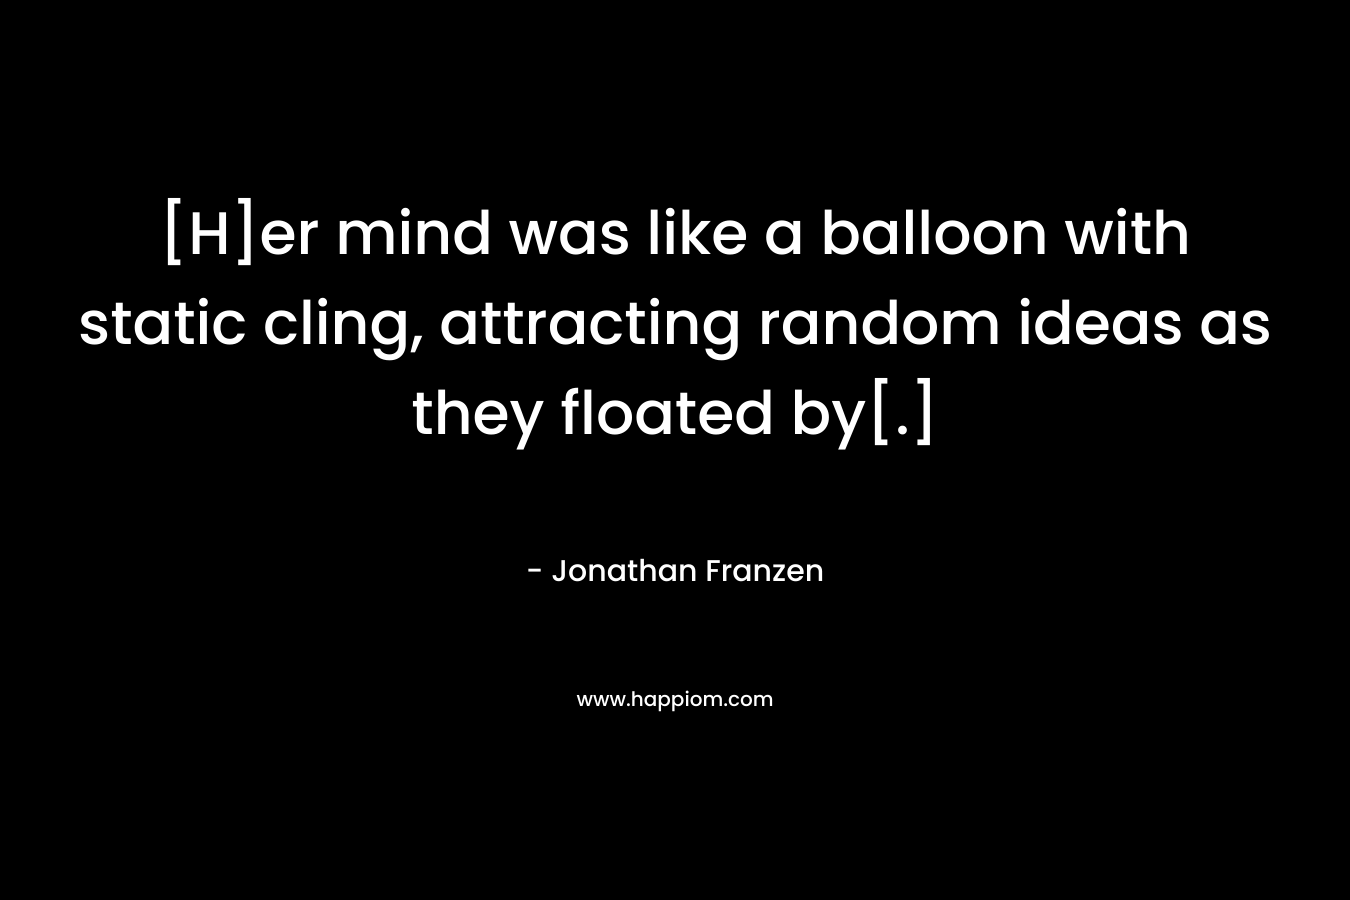 [H]er mind was like a balloon with static cling, attracting random ideas as they floated by[.]